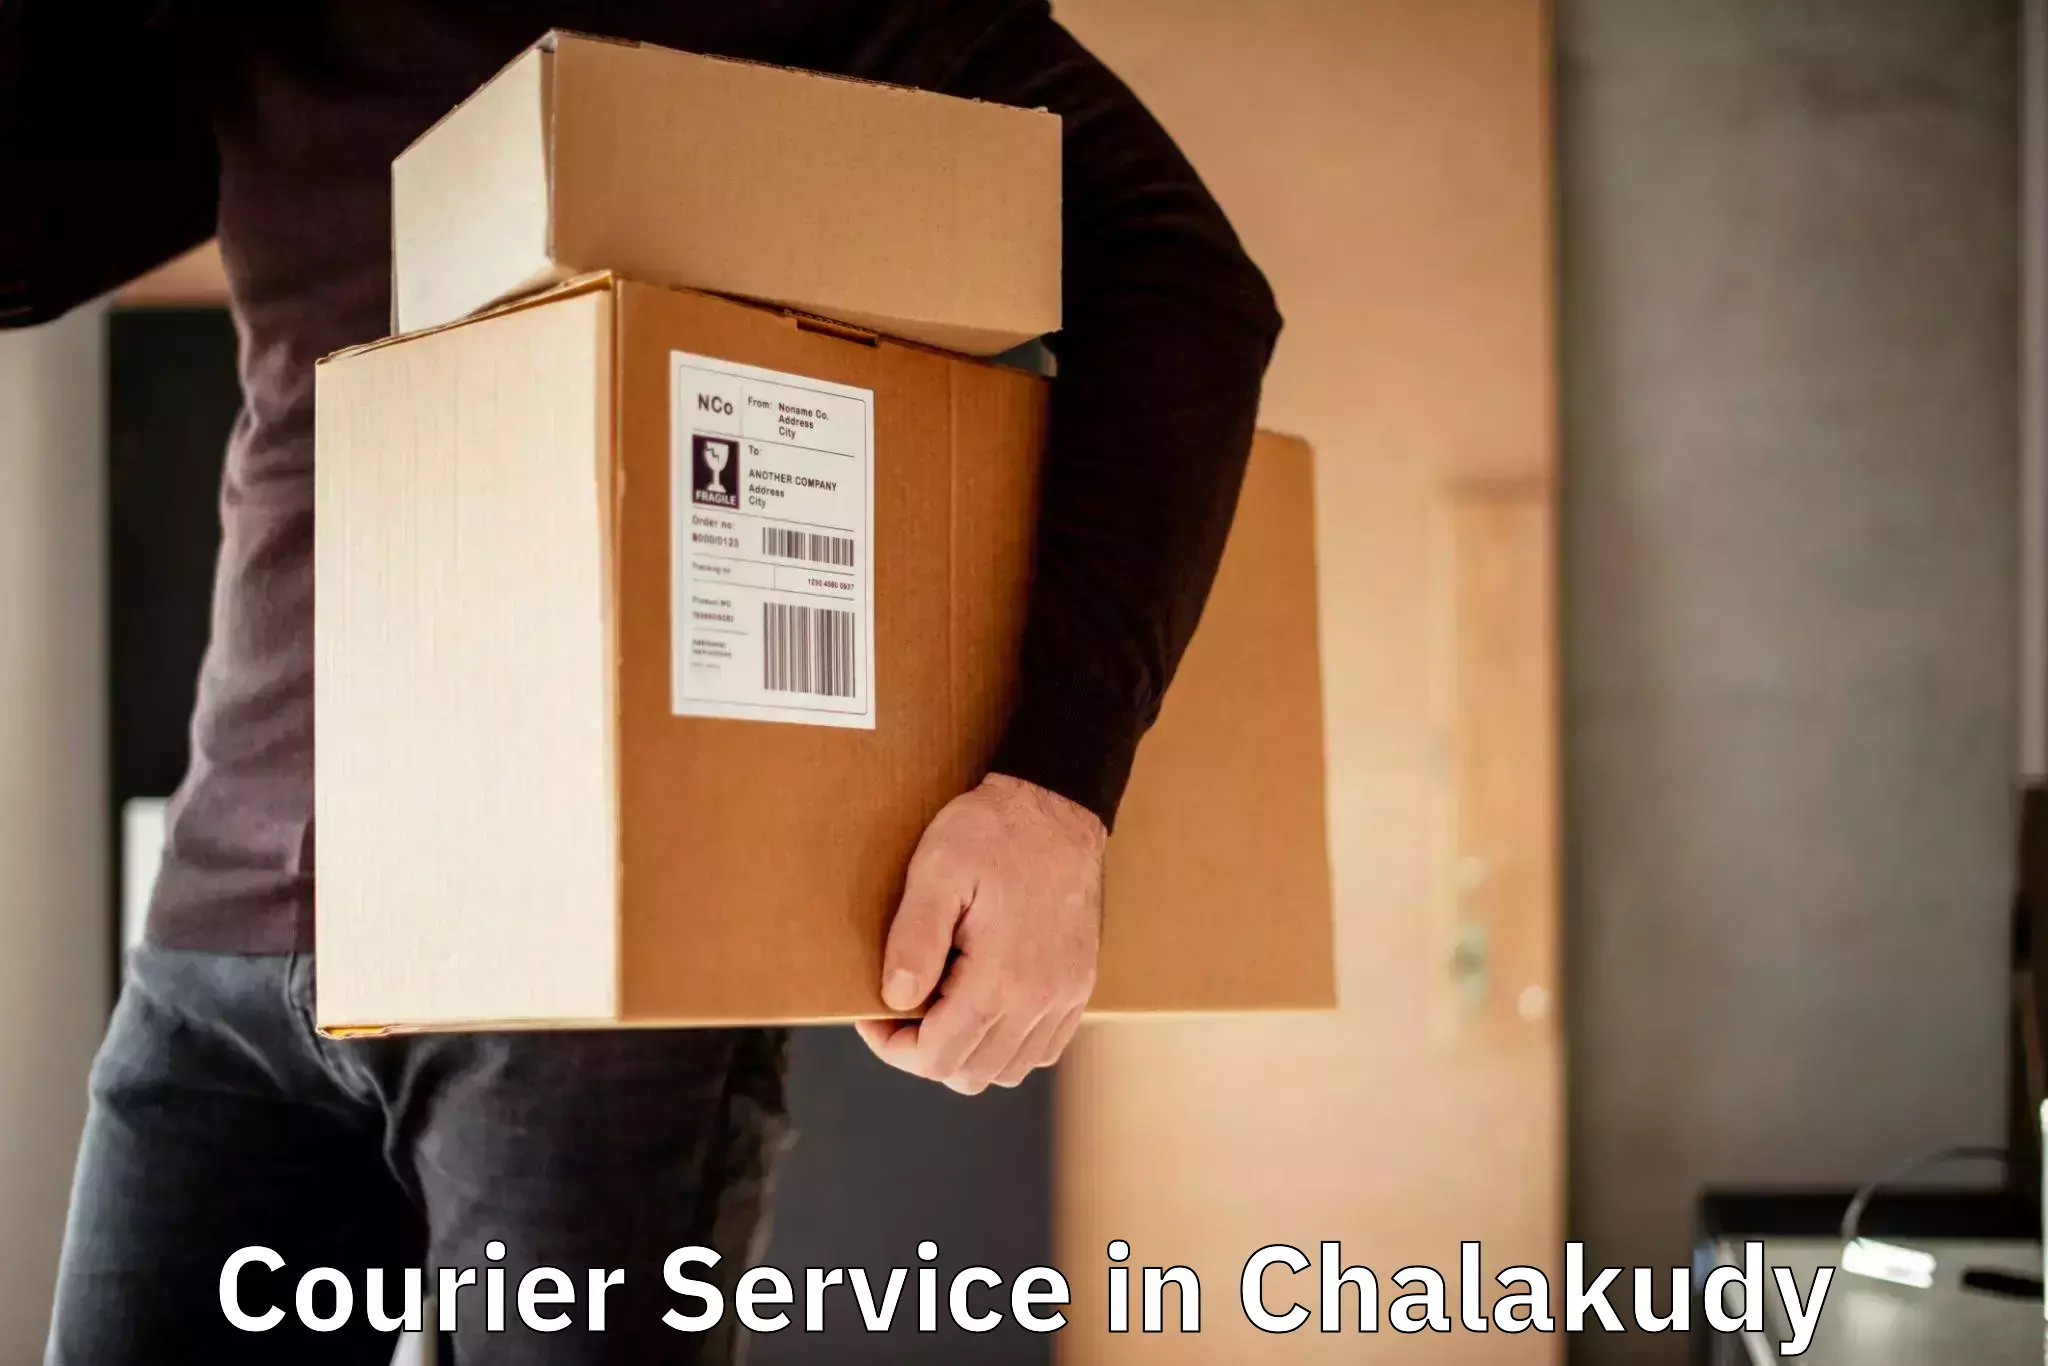 Trackable shipping service in Chalakudy